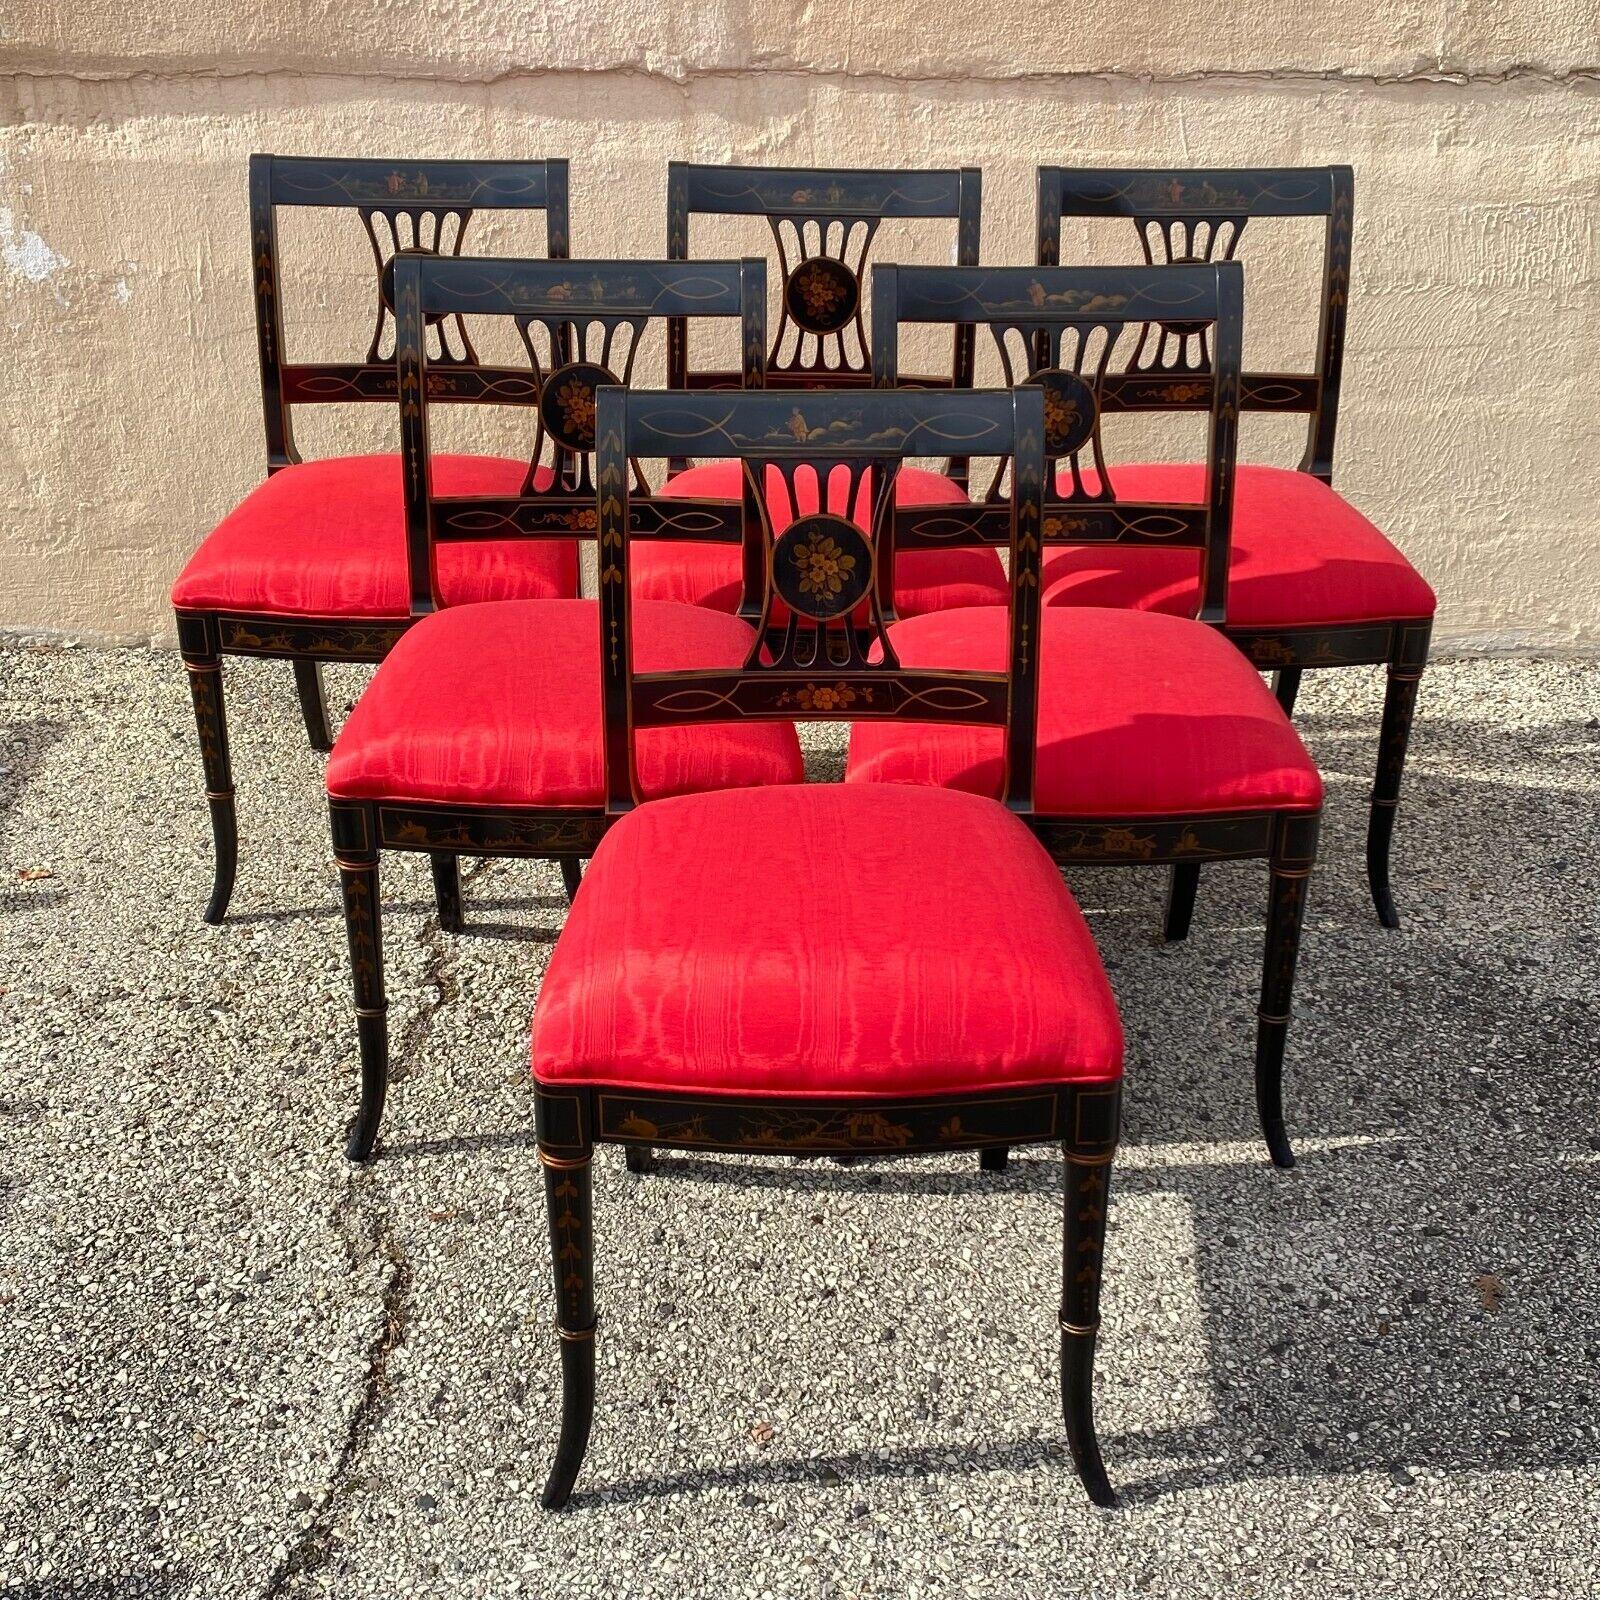 Vintage Chinoiserie English Regency Style Black Painted Dining Chairs - Set of 6 For Sale 5